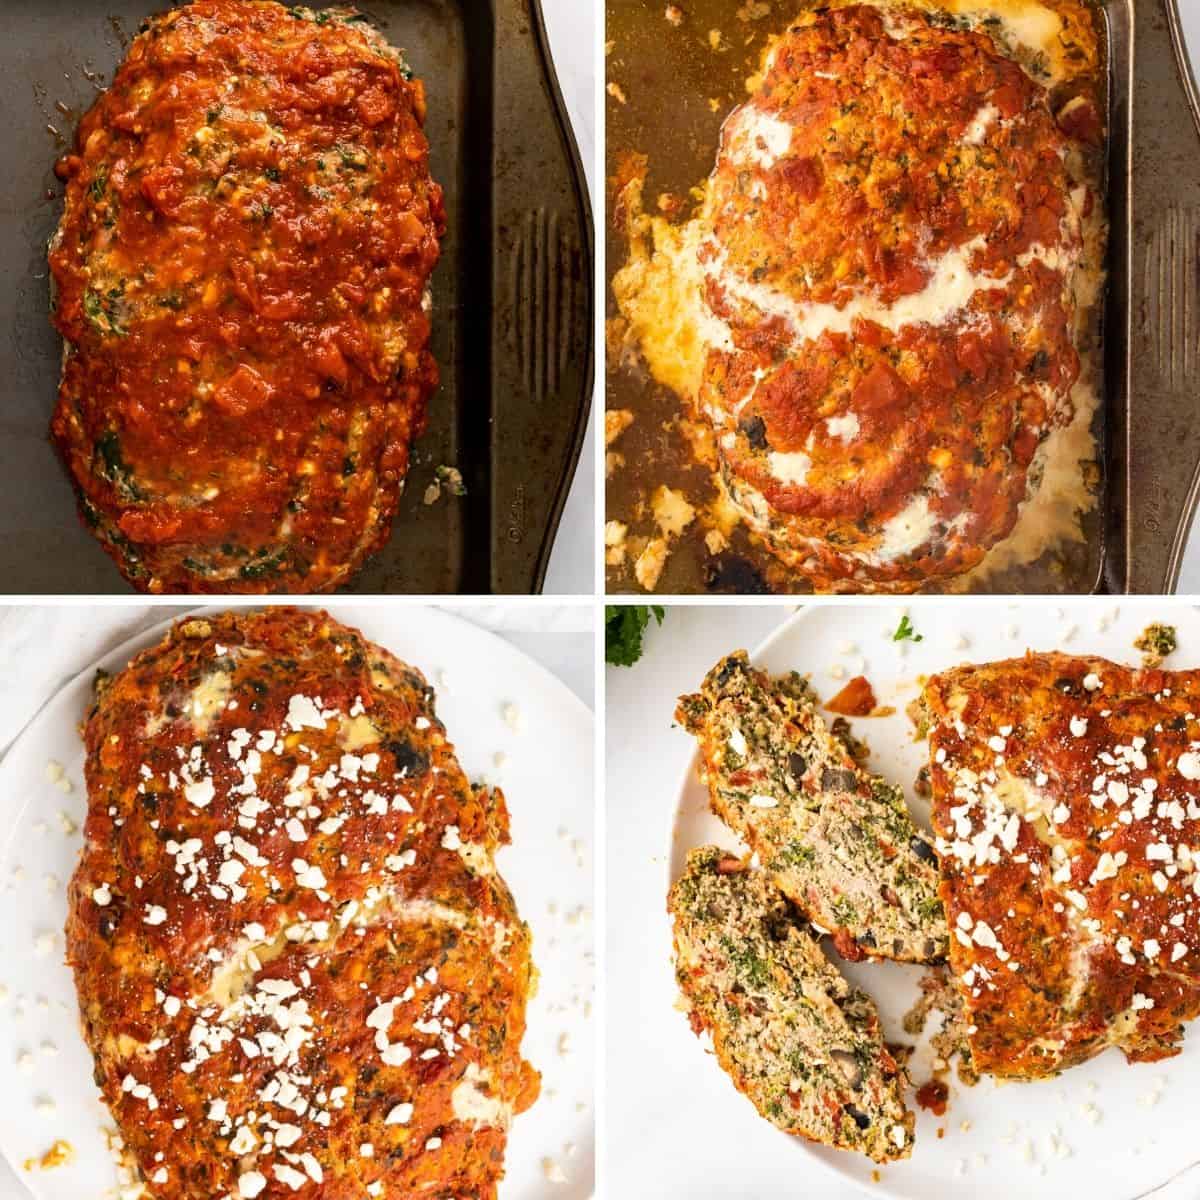 The collage shows the final steps in making Greek meatloaf.